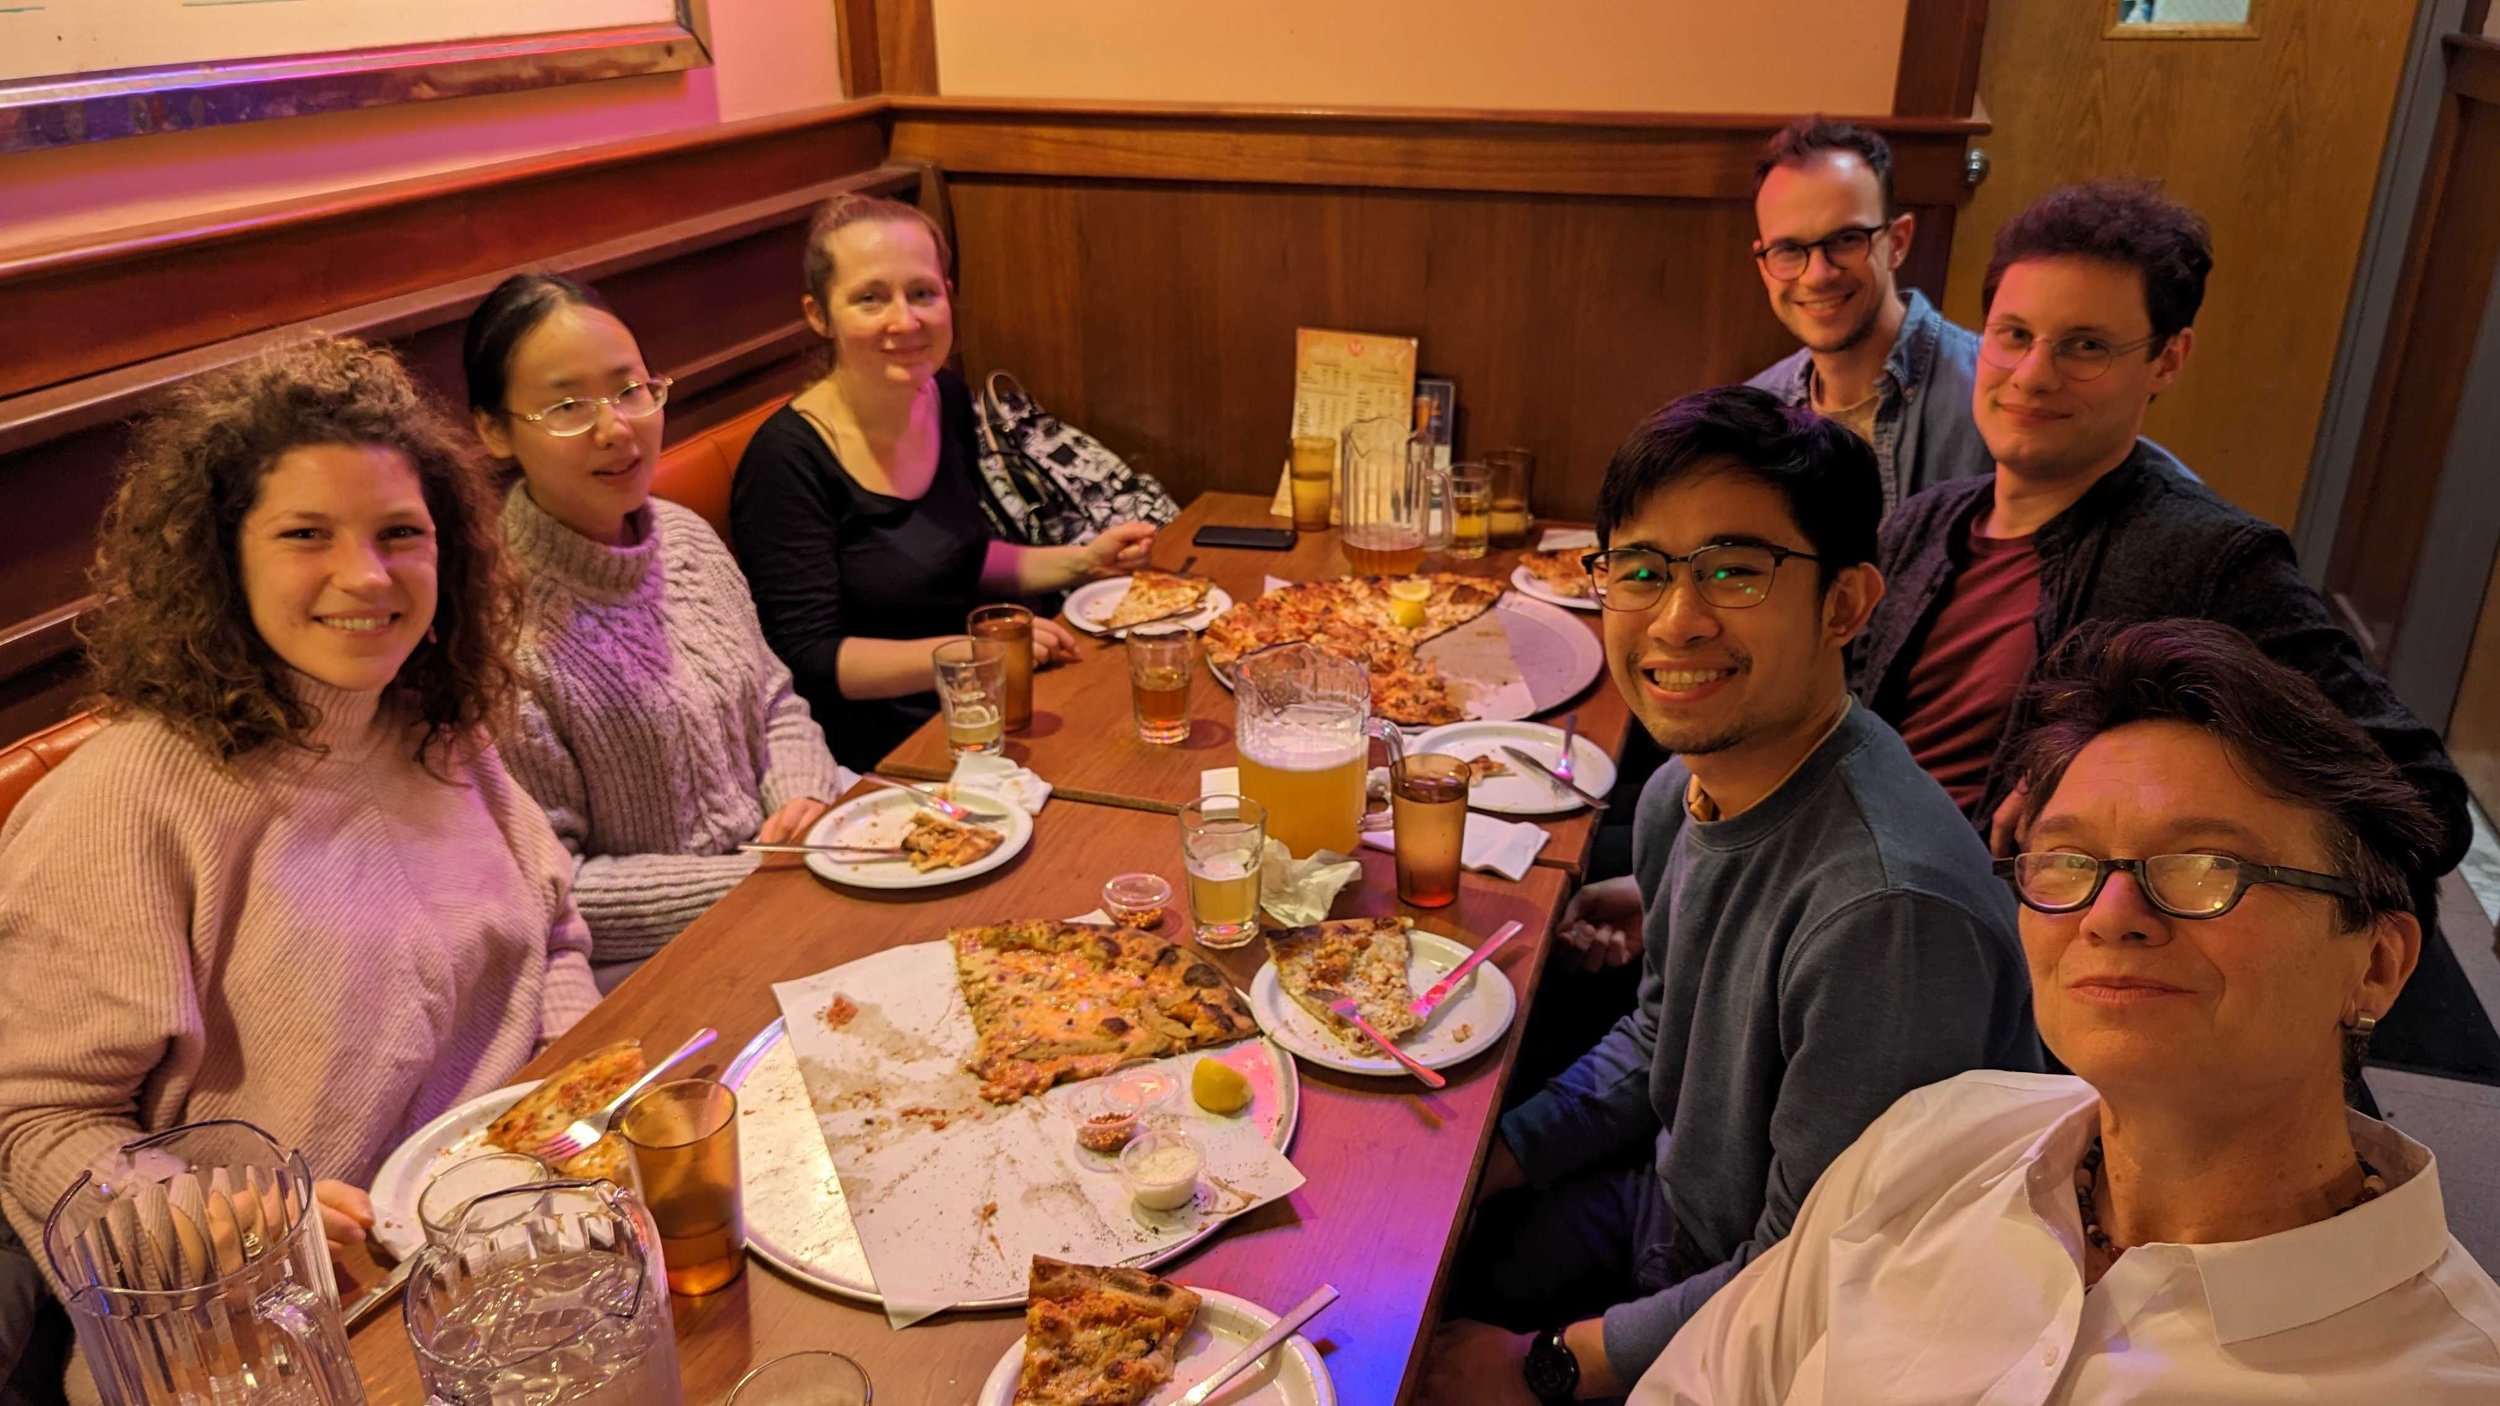 Post-Escape Room Dinner - March 2023